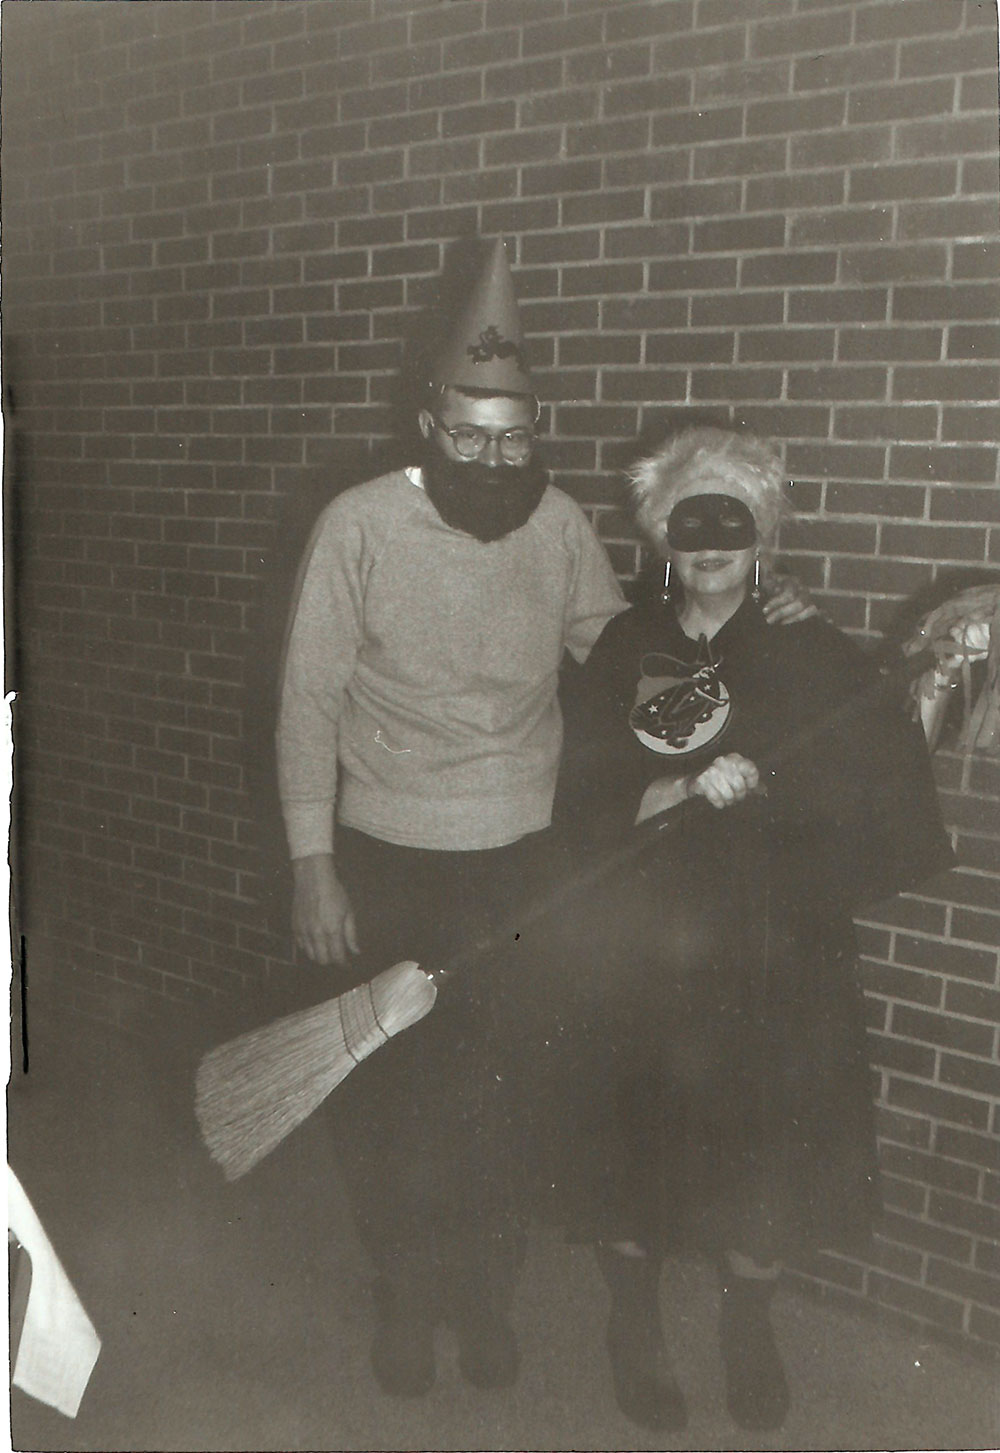 (FNB.2010.11.11) - Halloween Party, c. early 1960s